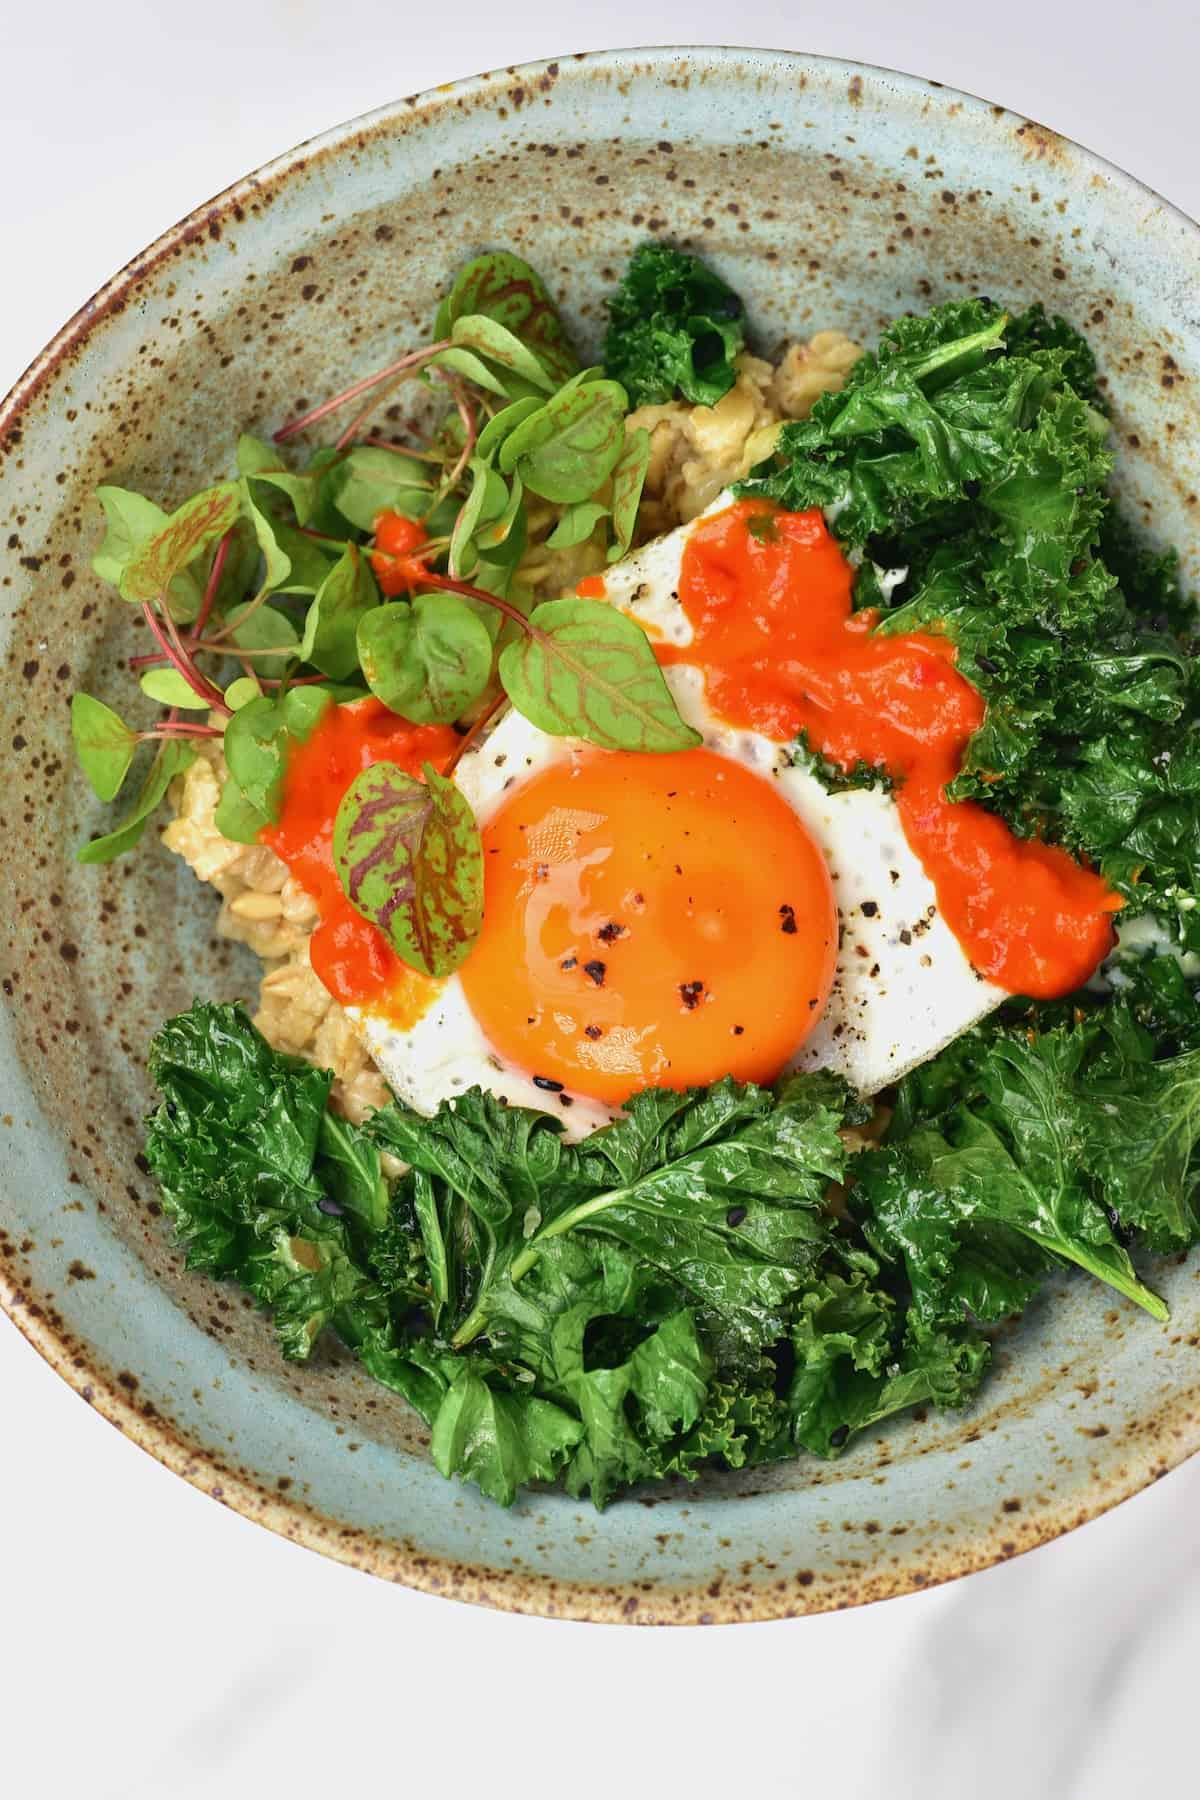 Oatmeal egg and kale in a bowl